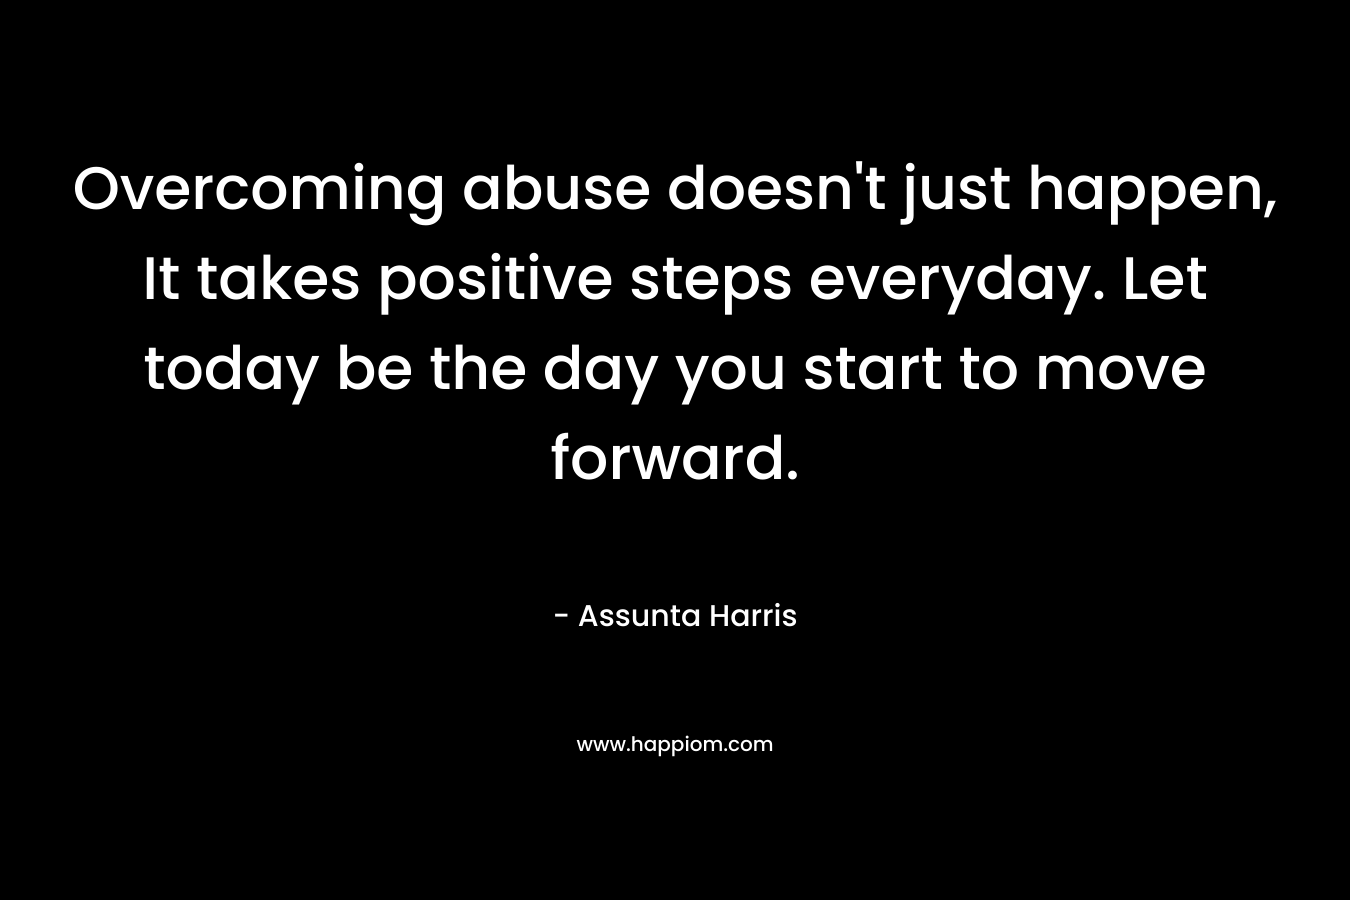 Overcoming abuse doesn't just happen, It takes positive steps everyday. Let today be the day you start to move forward.